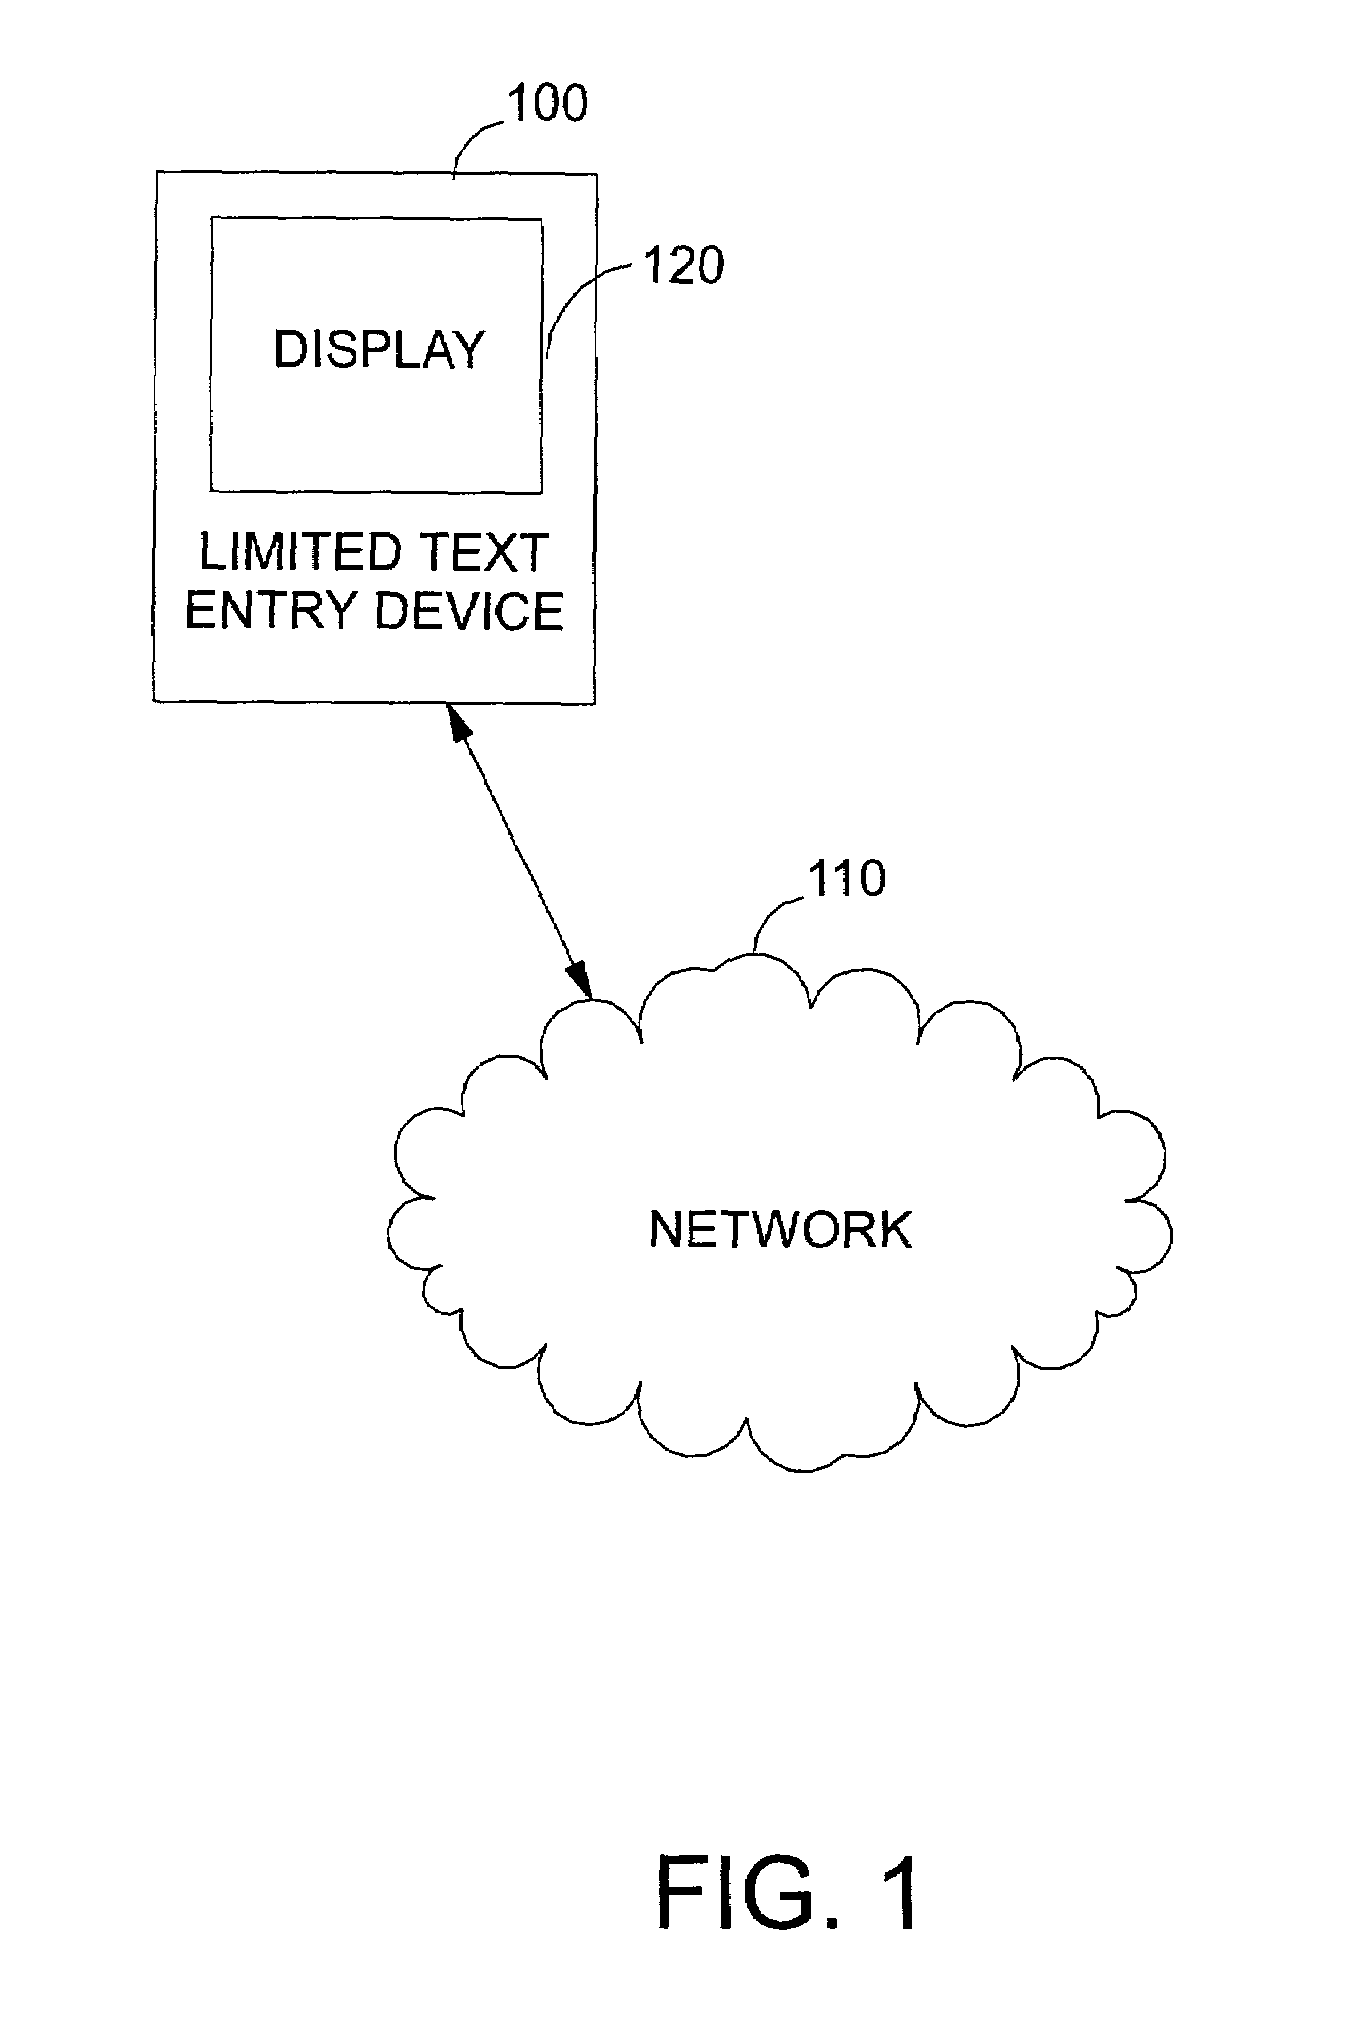 System for and method of selecting and presenting user customizable preferences